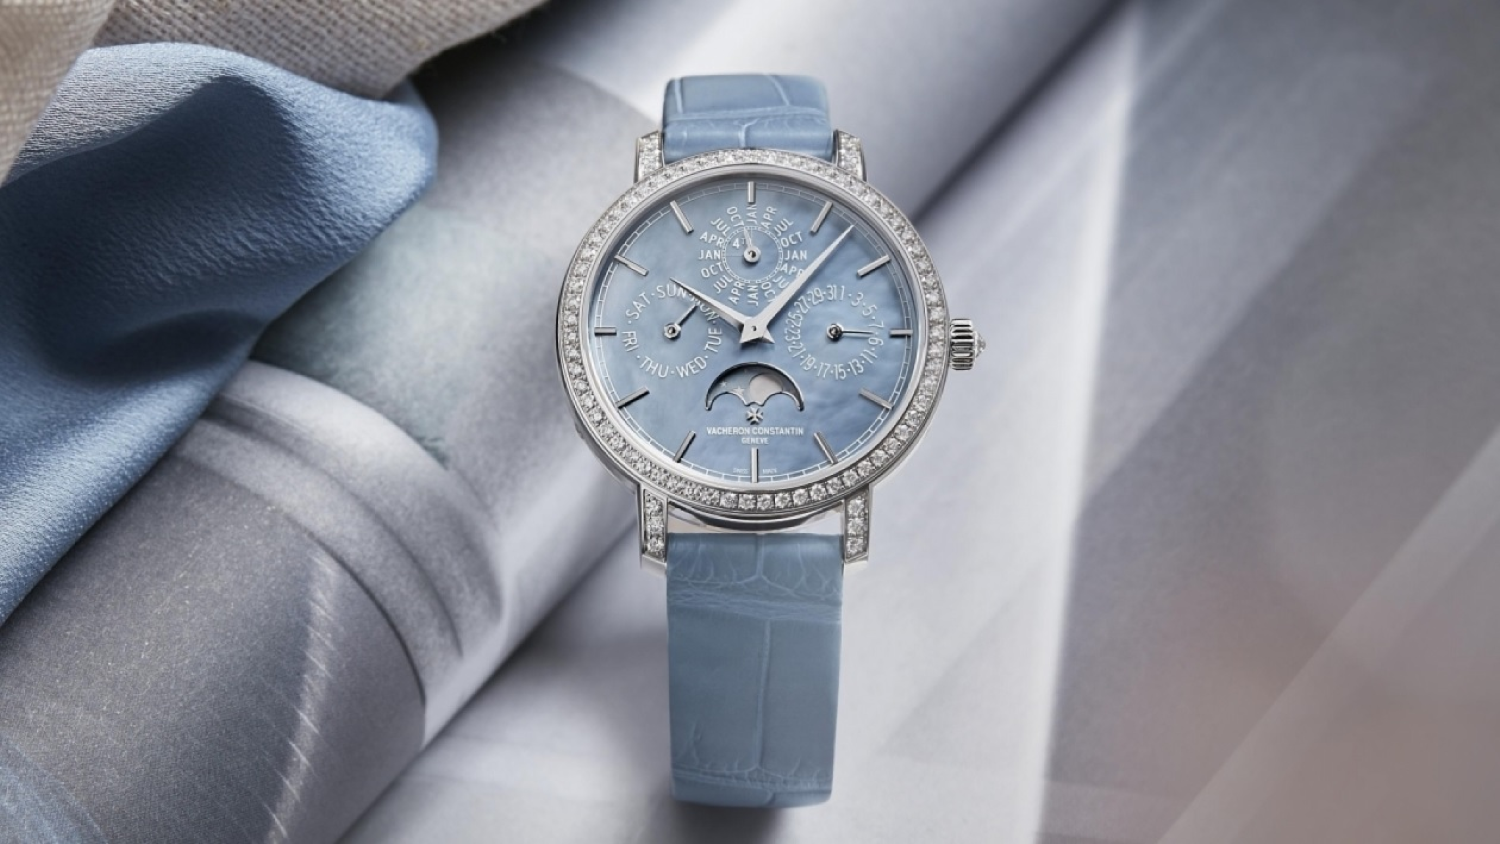 Favorite Ice Blue dial watches?